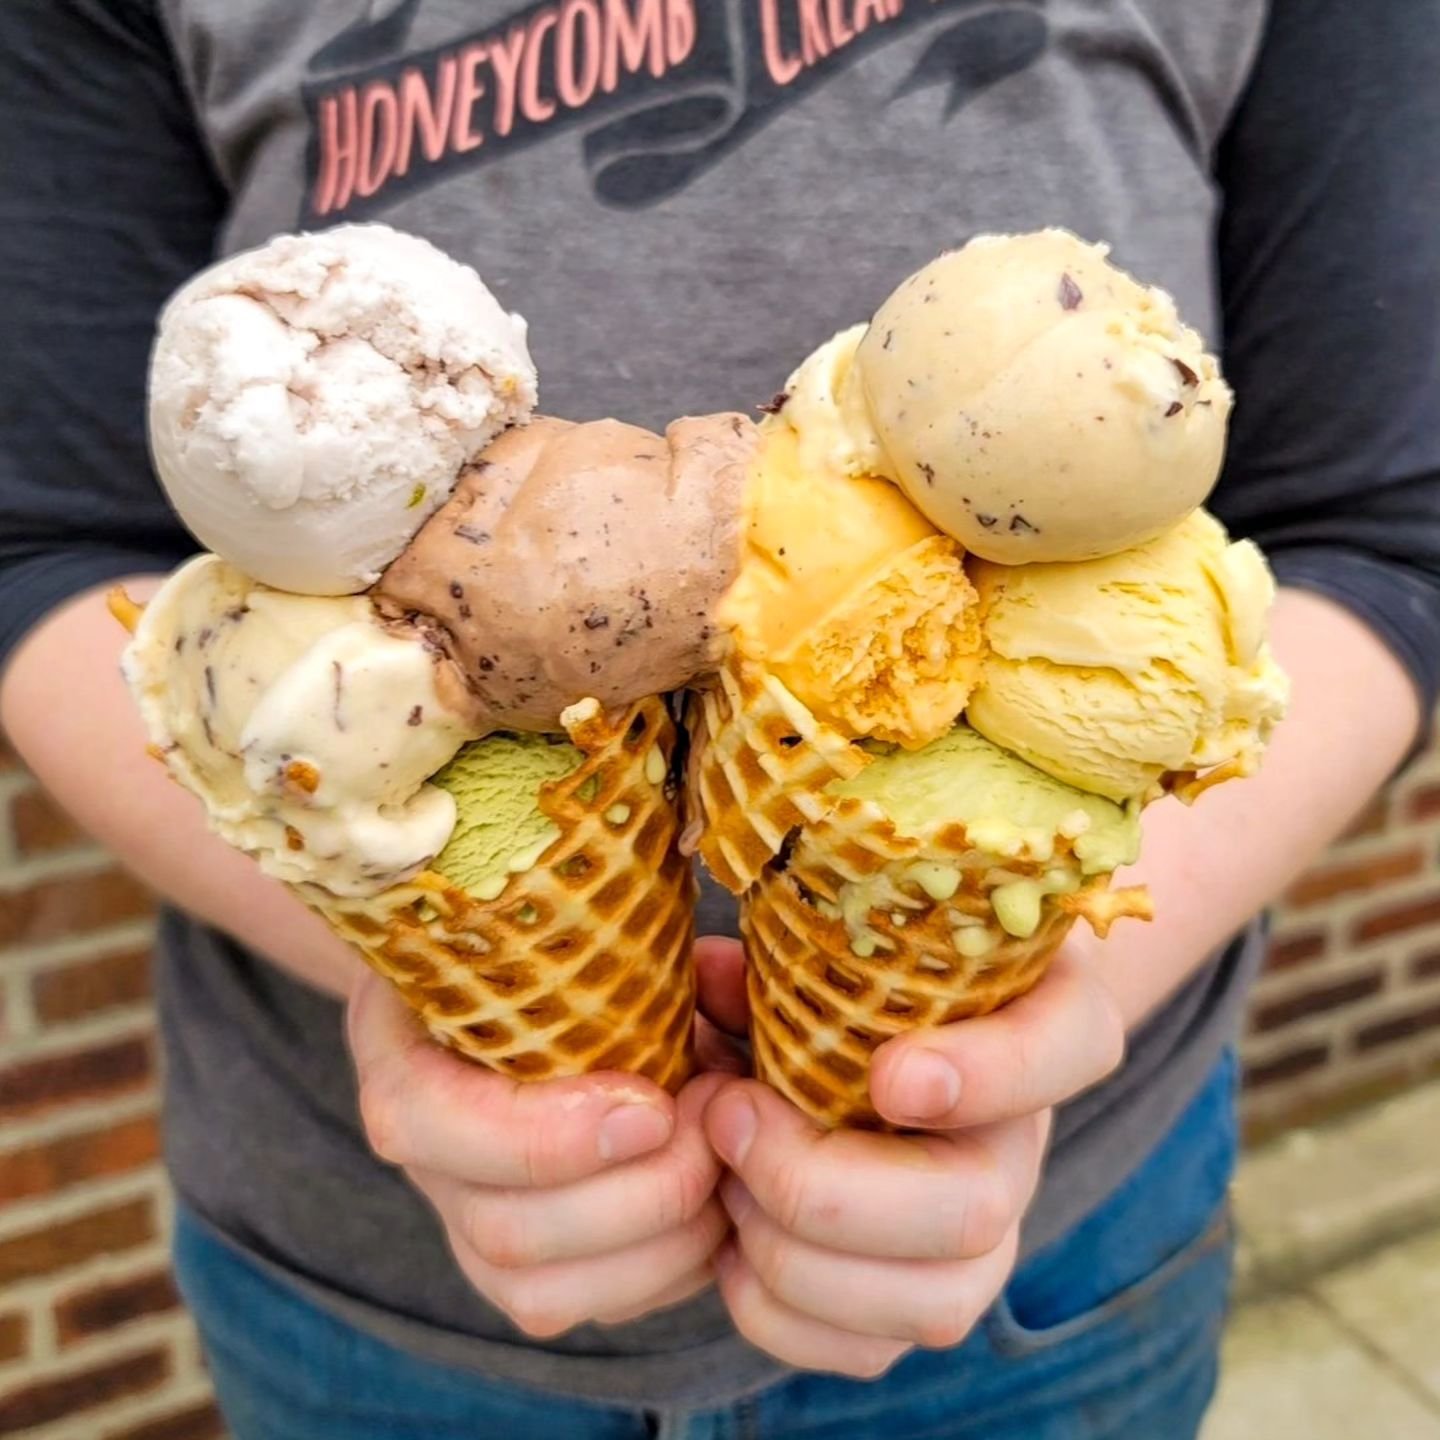 Want to treat your mom to something sweeter than flowers? We got you covered!🍦💐

We're scooping ice cream all day today (12-10 anyway) for you and the moms/maternal figures in your life! Our shop was founded/is owned by a mom, and with several of o